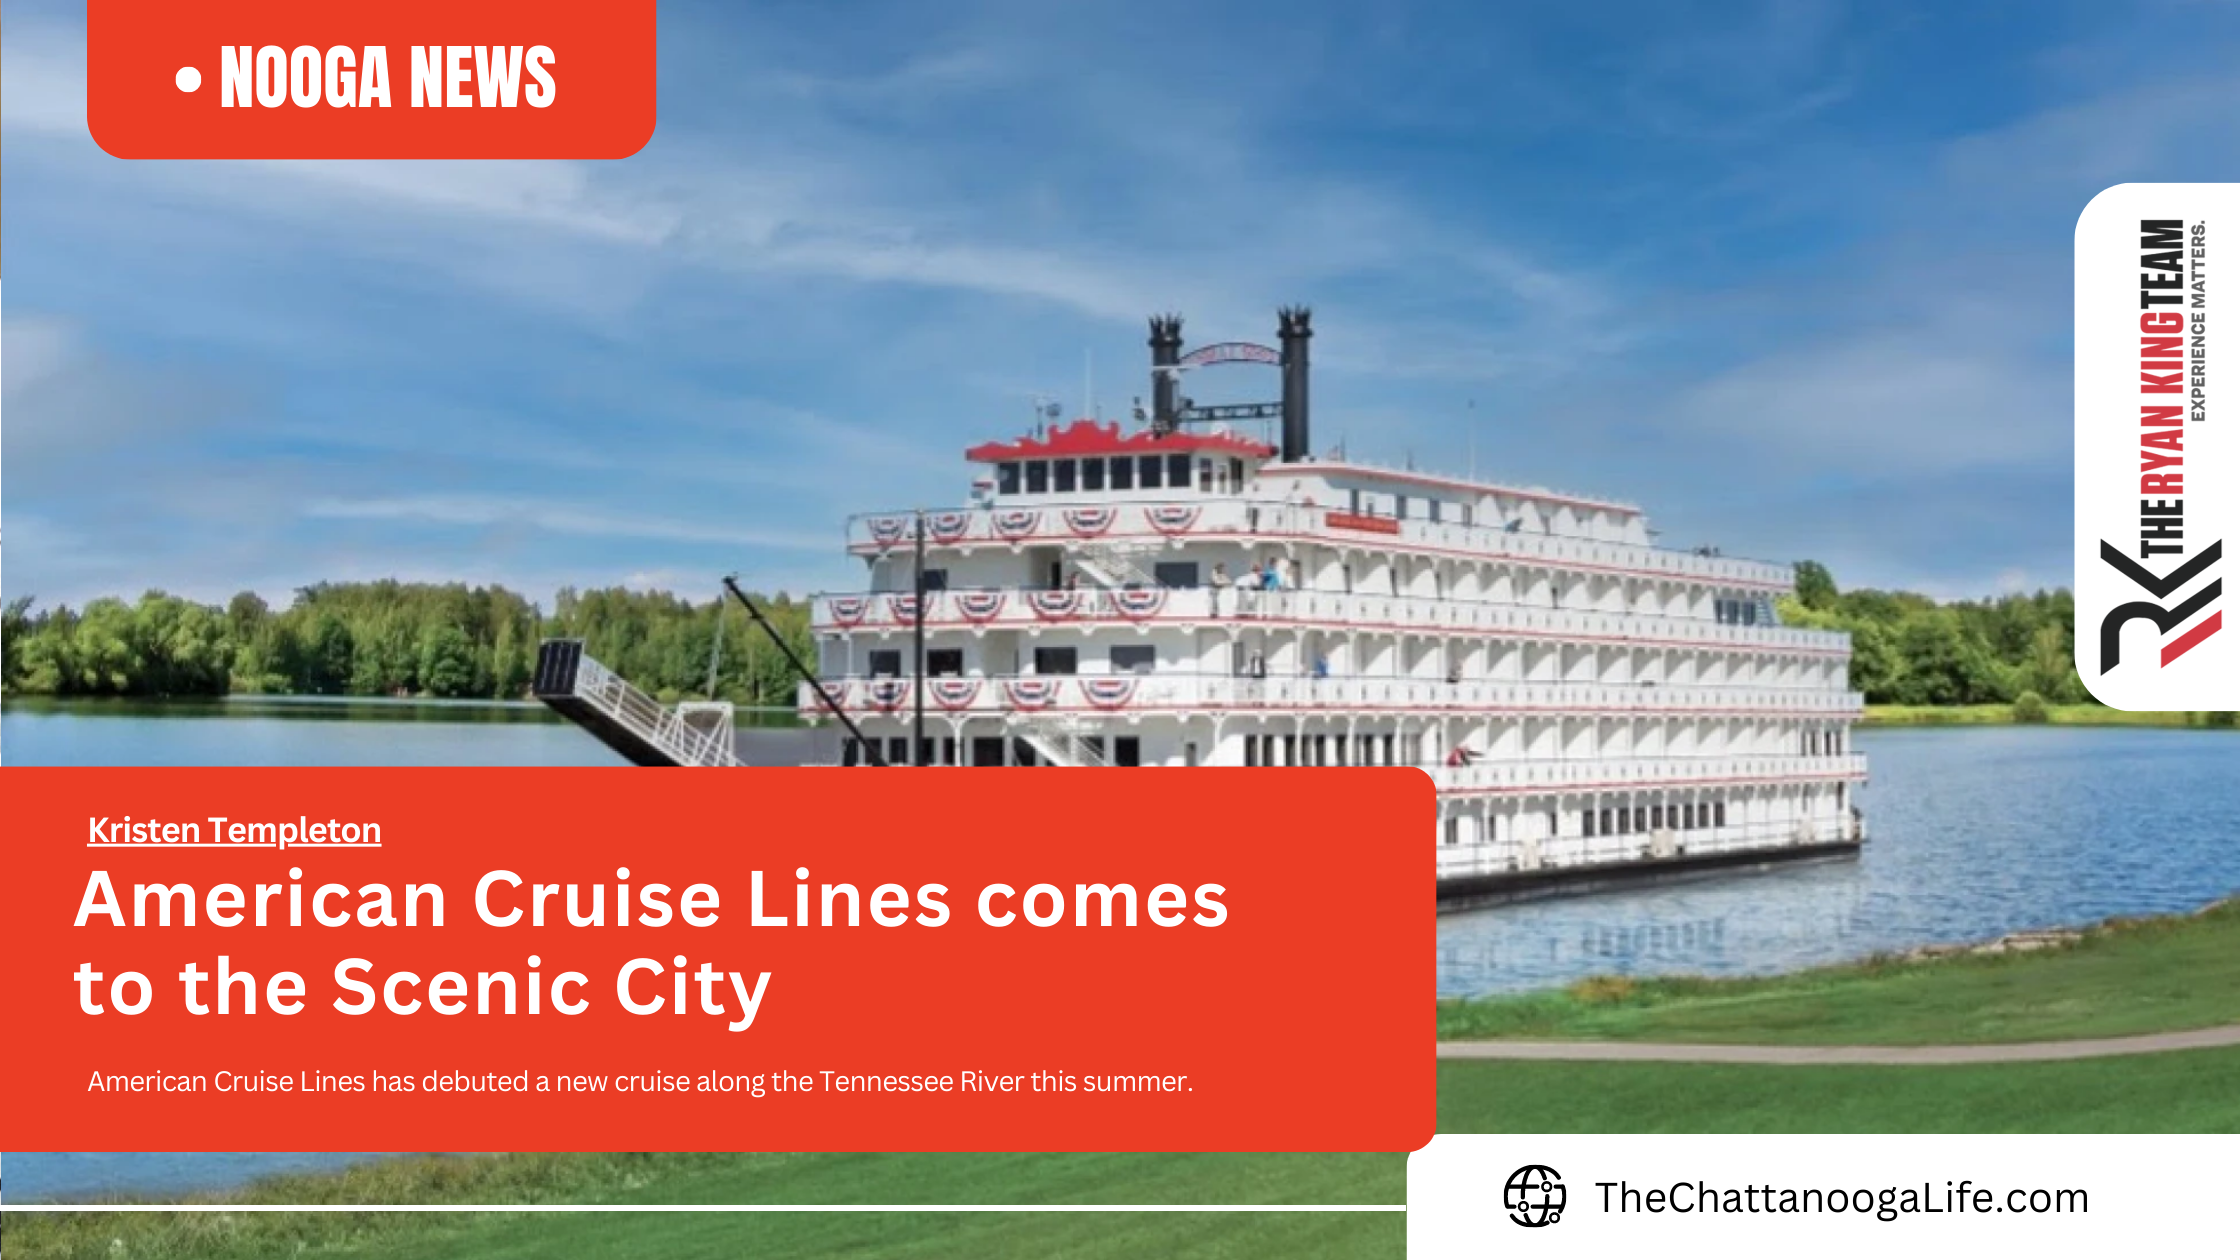 amercan cruise lines comes to the scenic city